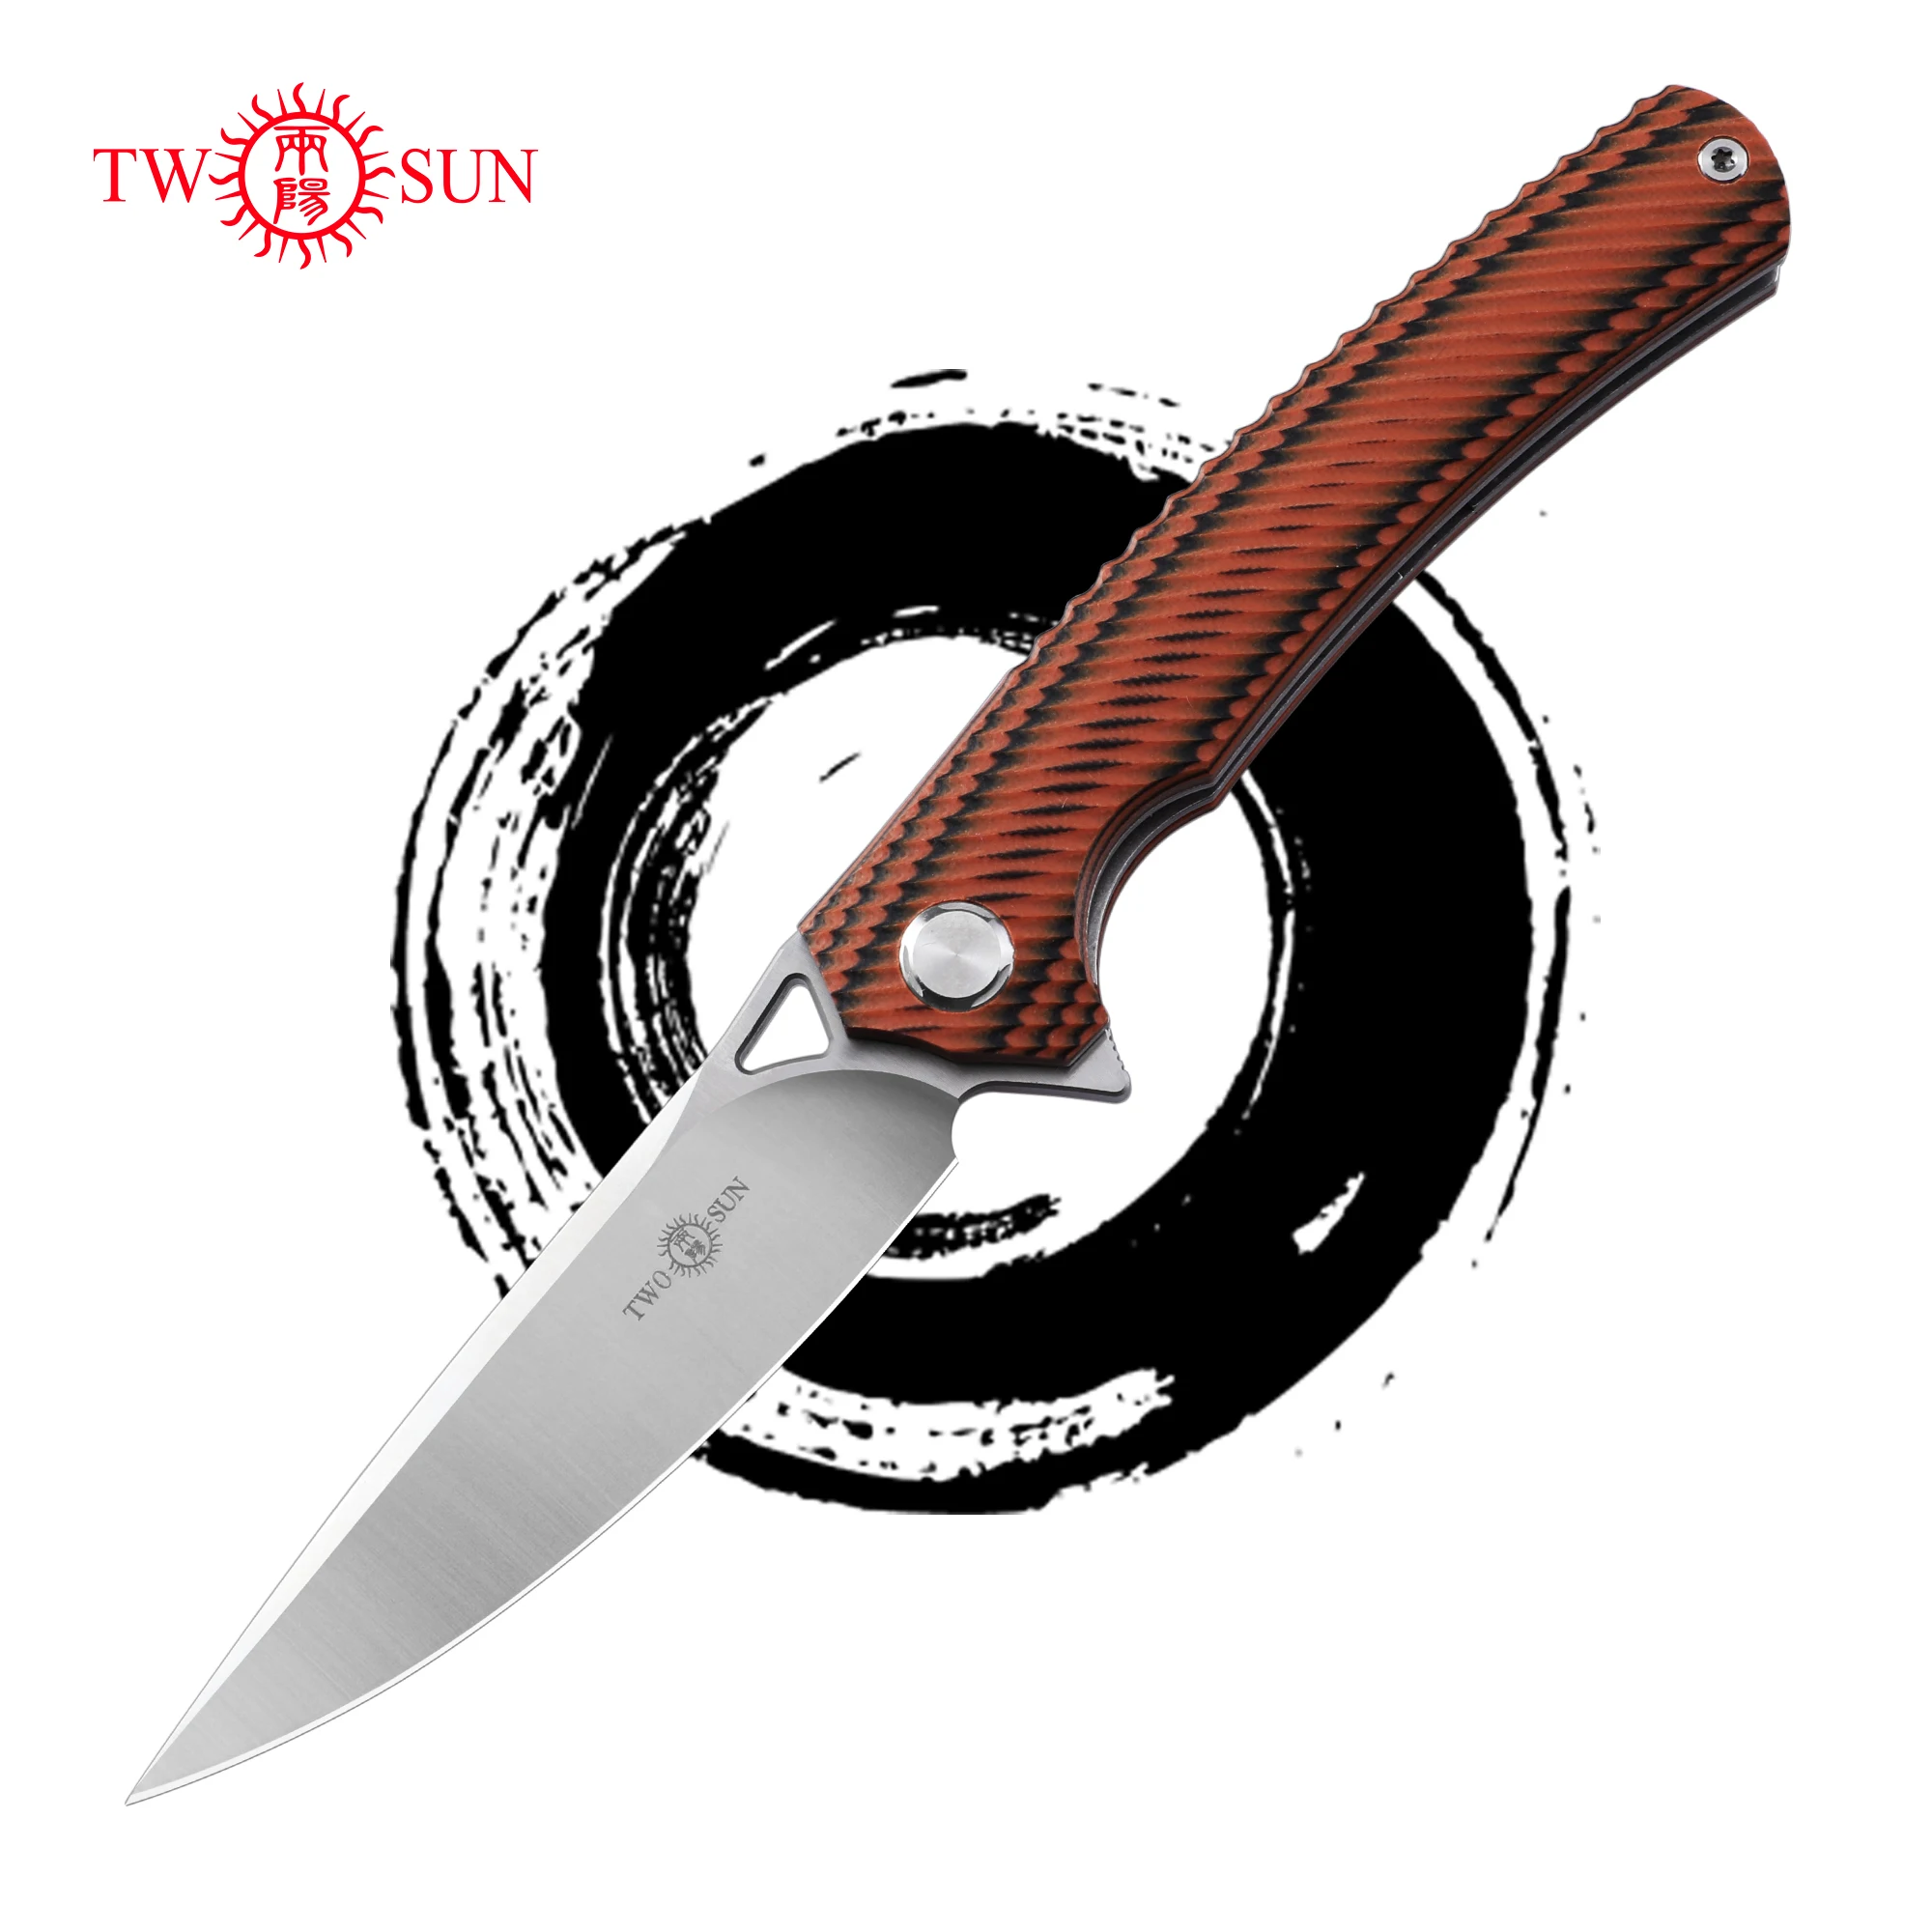 

TWOSUN TS81 Folding Knives Flipper Open D2 Steel Blade G10 Handle Camping Hunting Outdoor Survival Pocket EDC Tool Humb Hole